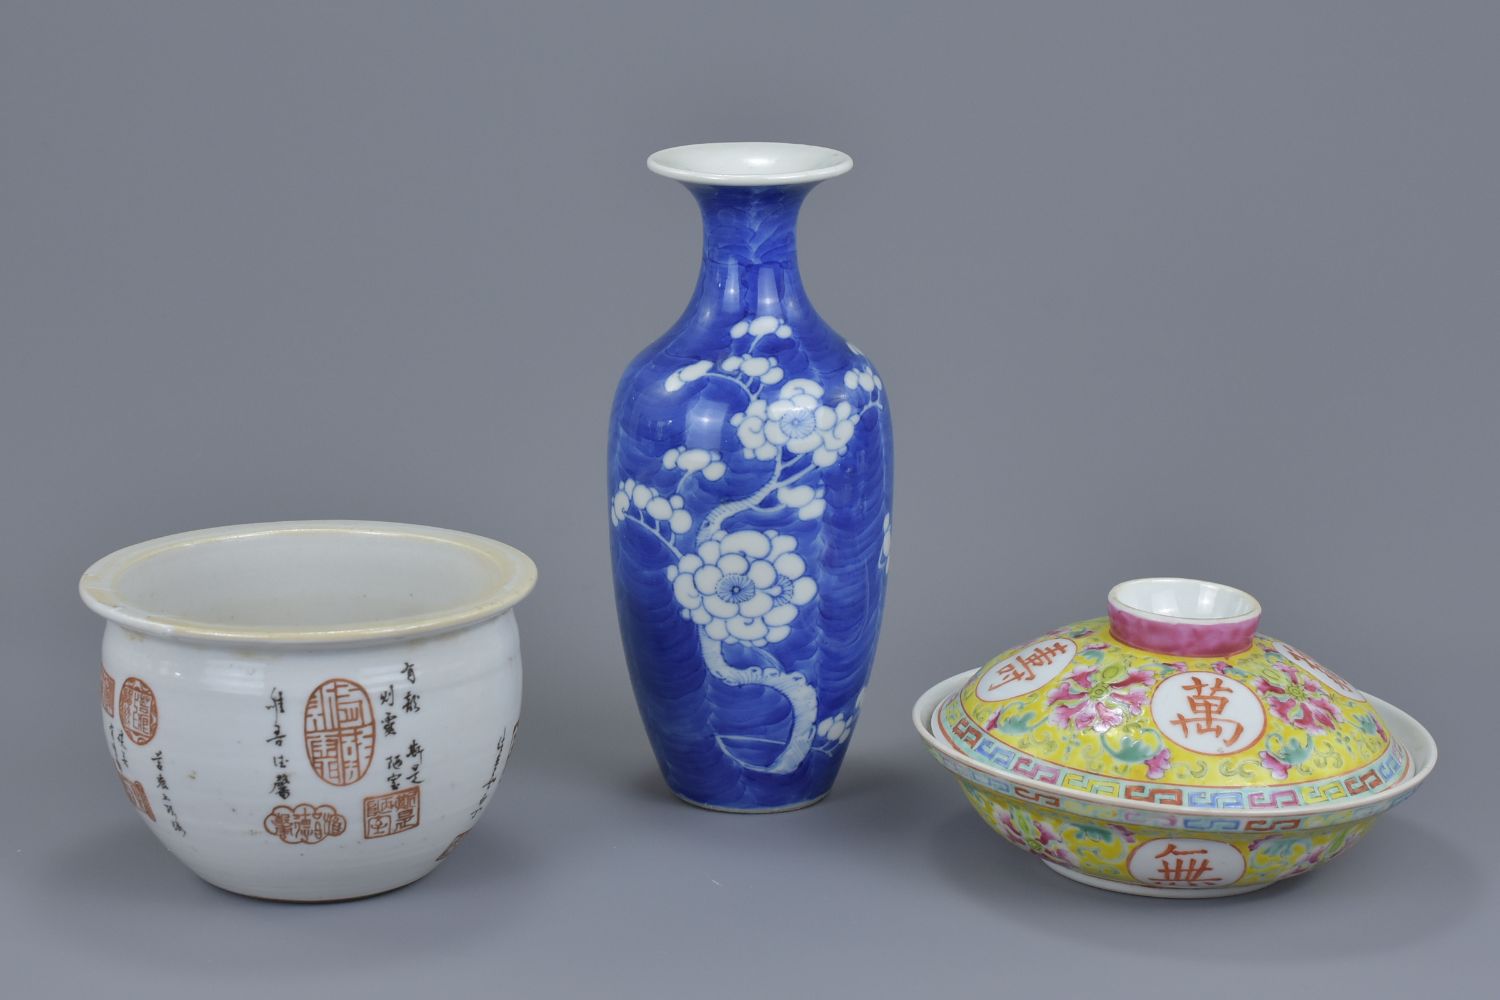 Asian Art and Antiques - Online sale